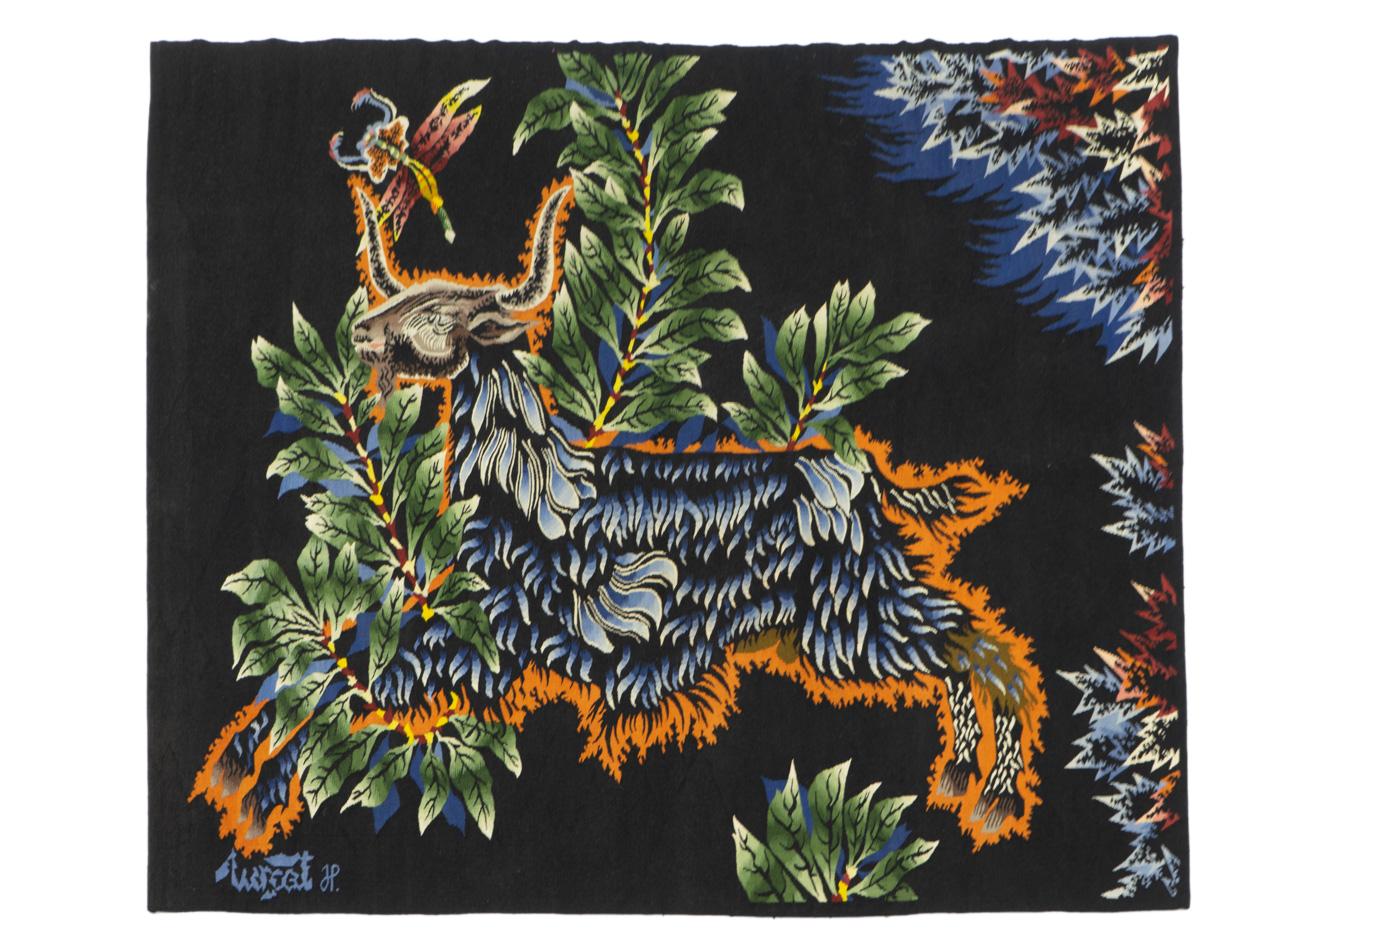 Handwoven tapestry, 'Le Bouc Bleu' by Jean Lurçat for Atelier Jane Pérethon,
Signed and labelled.
 

Origination: 1950s, France. 

Condition: Very good. Tapestry has been professionally cleaned. 

Materials: Wool
 

Approximate dimensions:

Width: